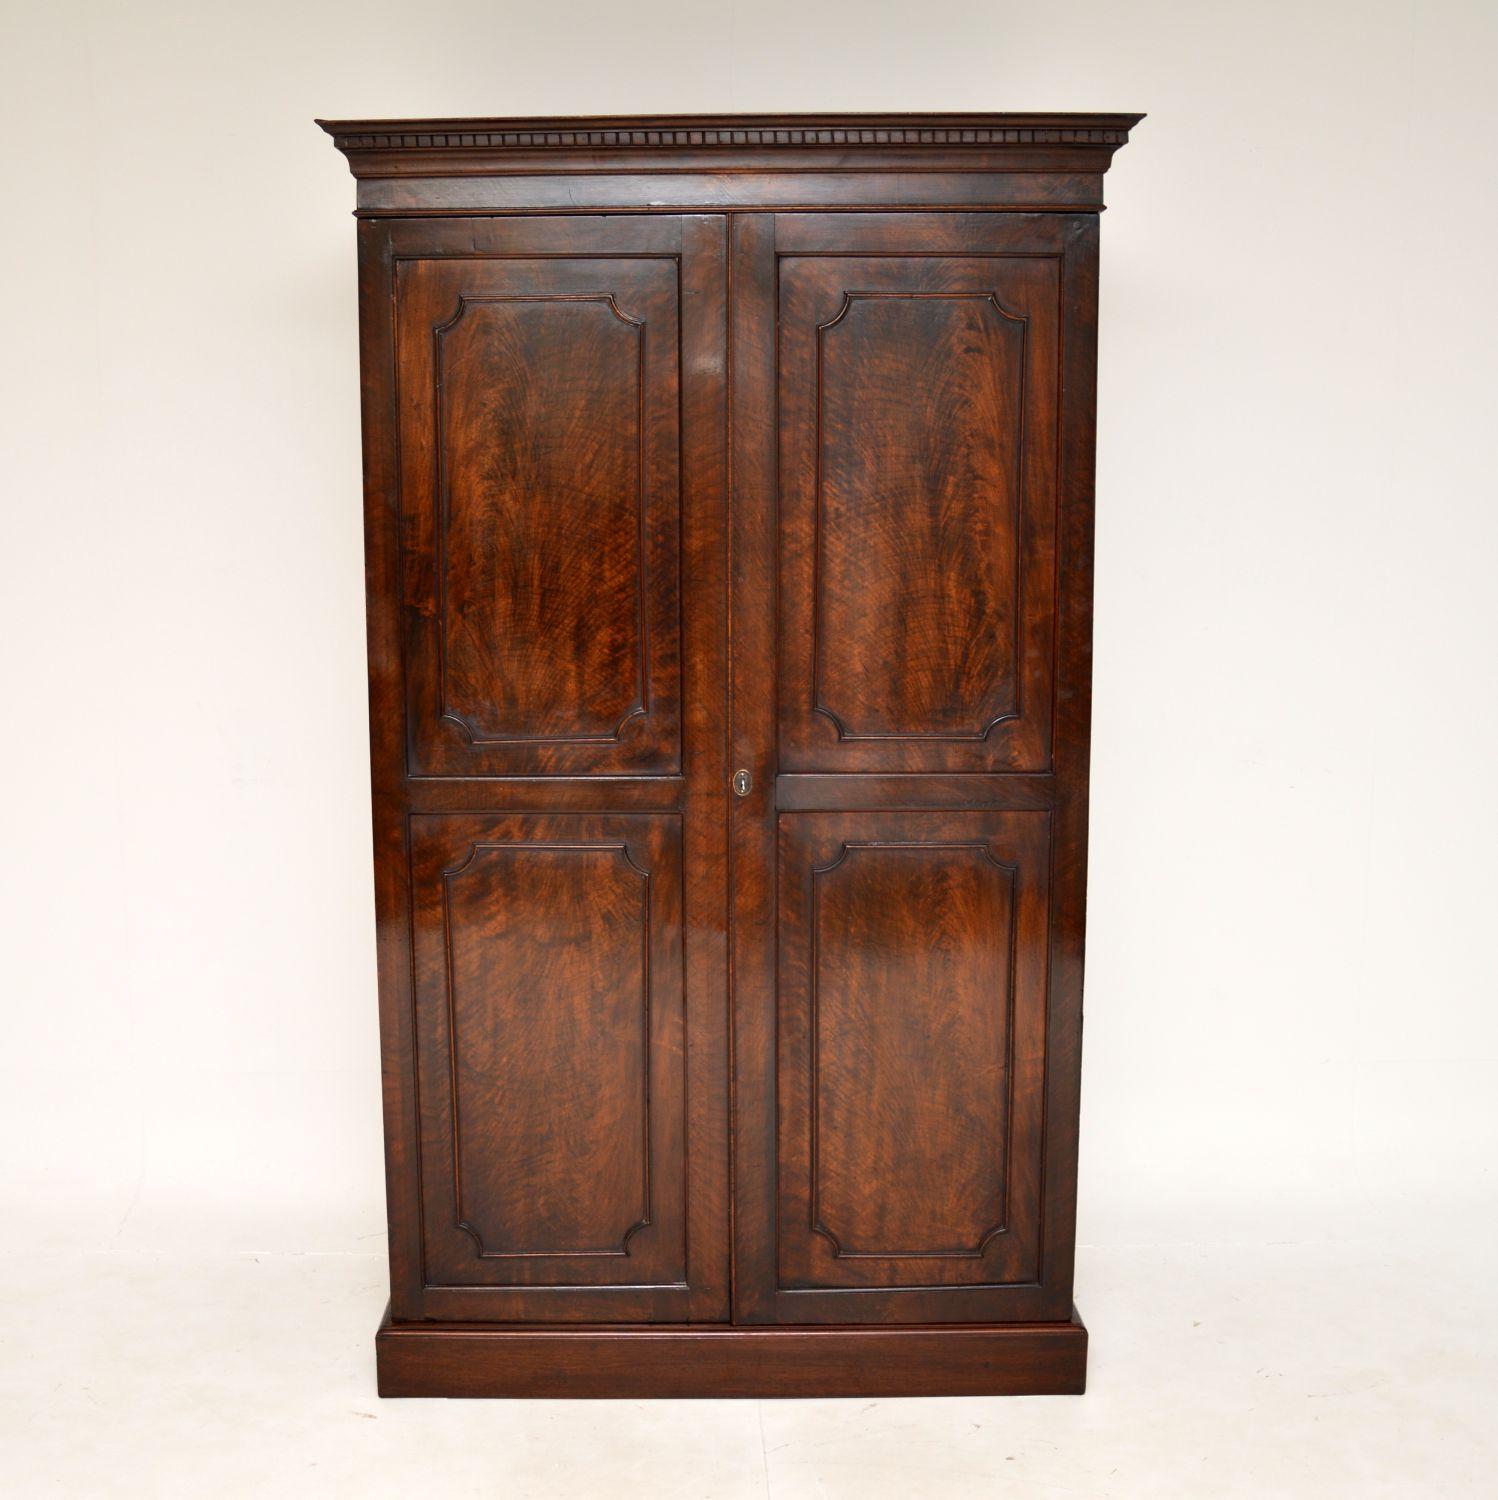 A fantastic original Edwardian period hall cupboard. This was made in England, and it dates from around the 1890-1900 period.

It is of amazing quality and is a very useful size. Ideal for use in an entry way, there is a hanging rail that runs